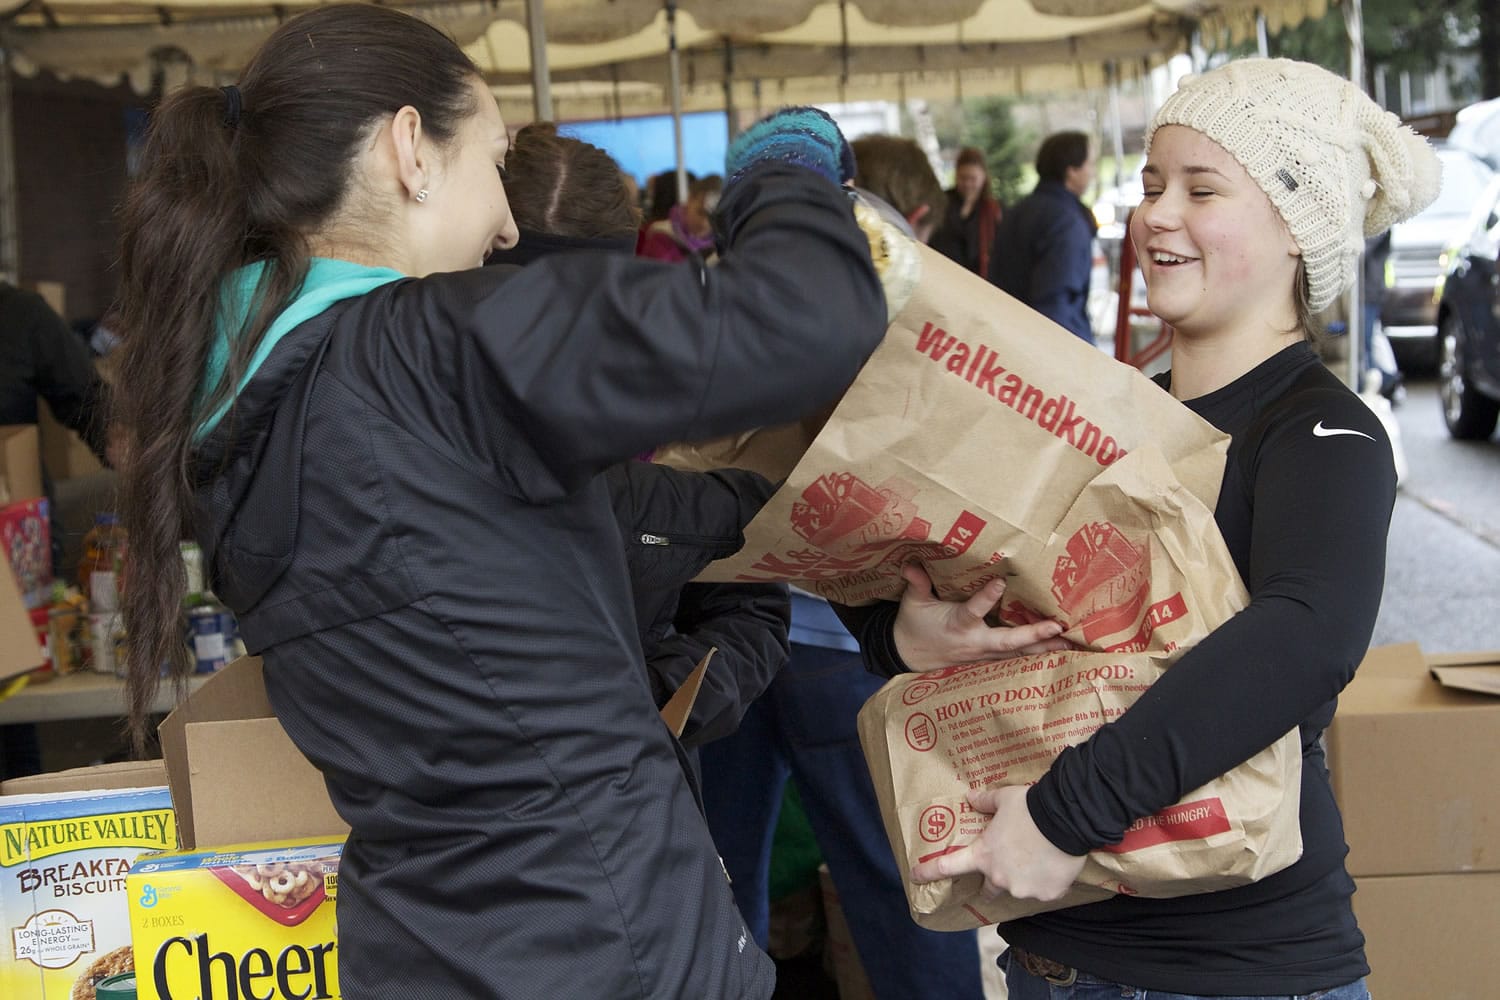 Megan Waller, 18, right, hands off bags of items donated for the 28th annual Walk